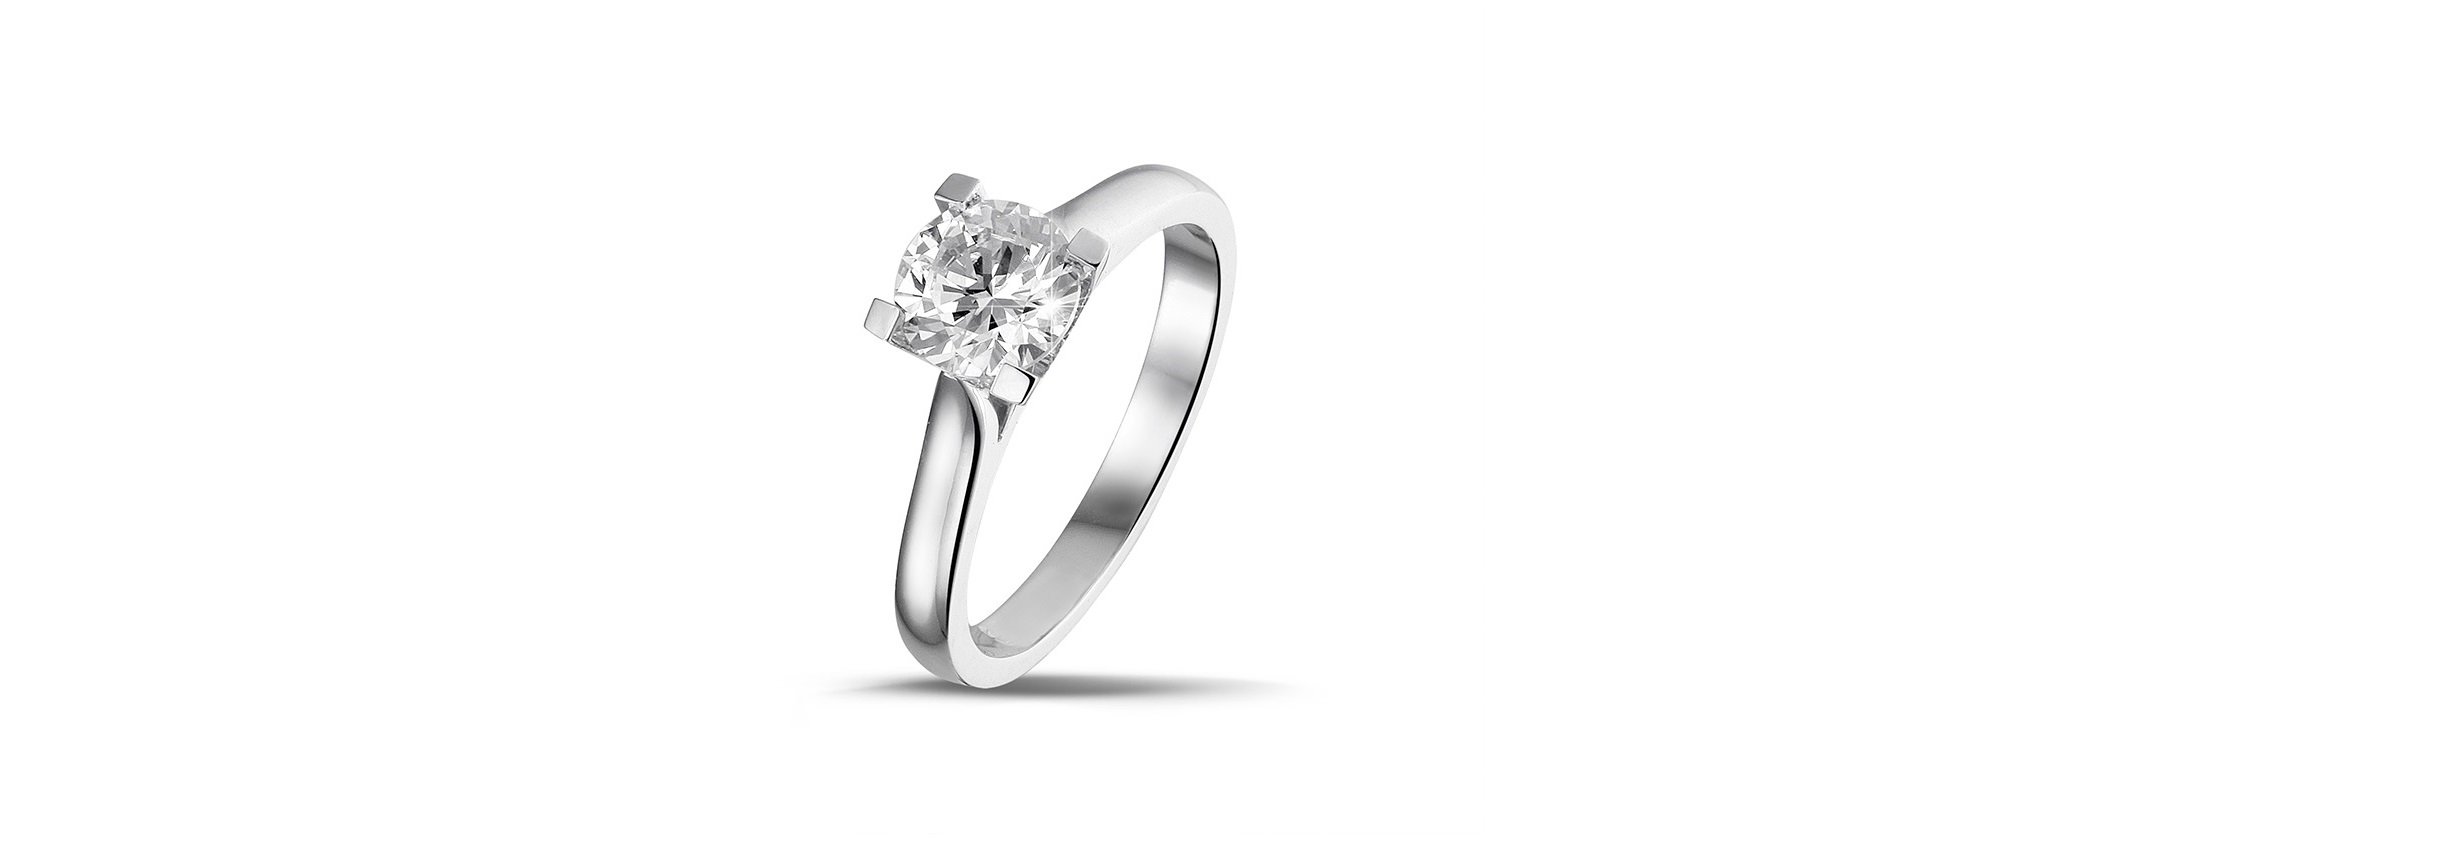 What engagement rings are there for ladies?